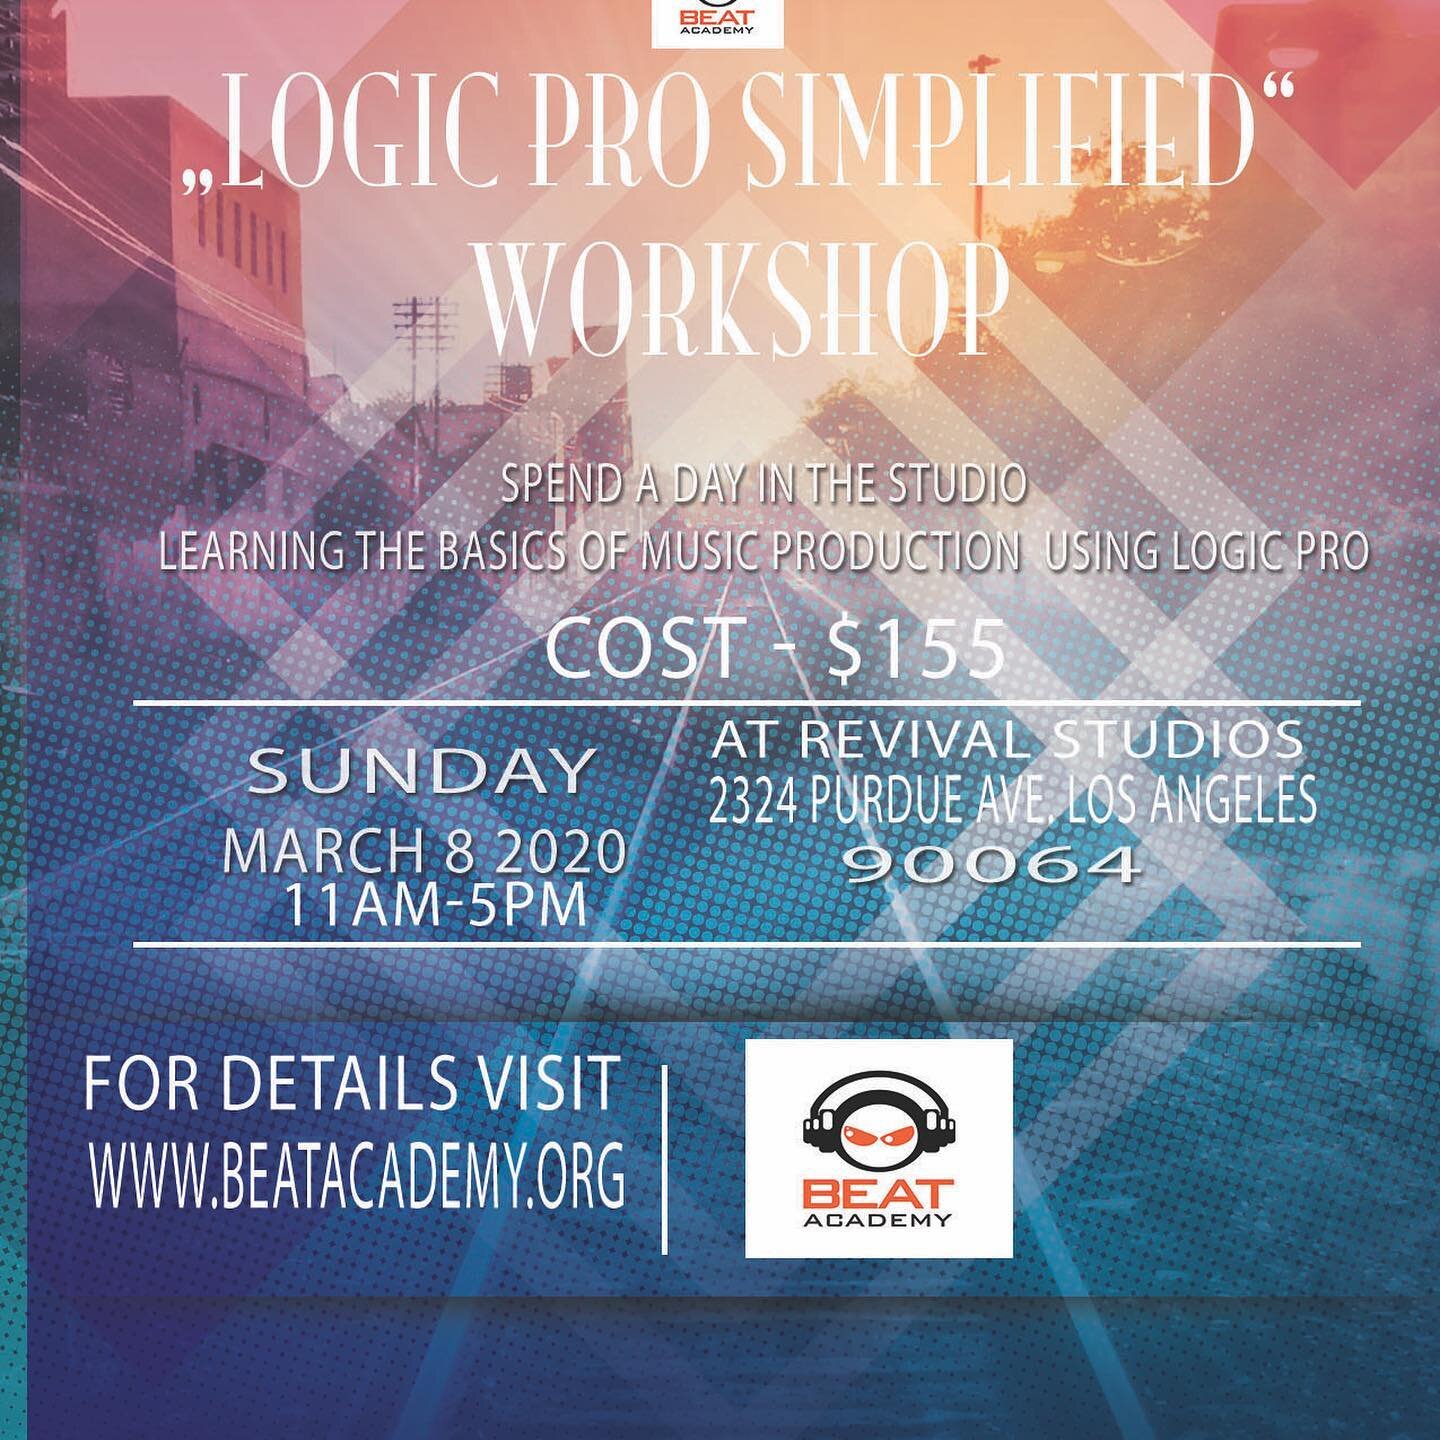 A new workshop coming up- Sunday March 8 ! &ldquo;Logic Simplified&rdquo; .... learn some simple music production basics and techniques using Logic Pro X. Visit www.beatacademy.org for more details and how to register!